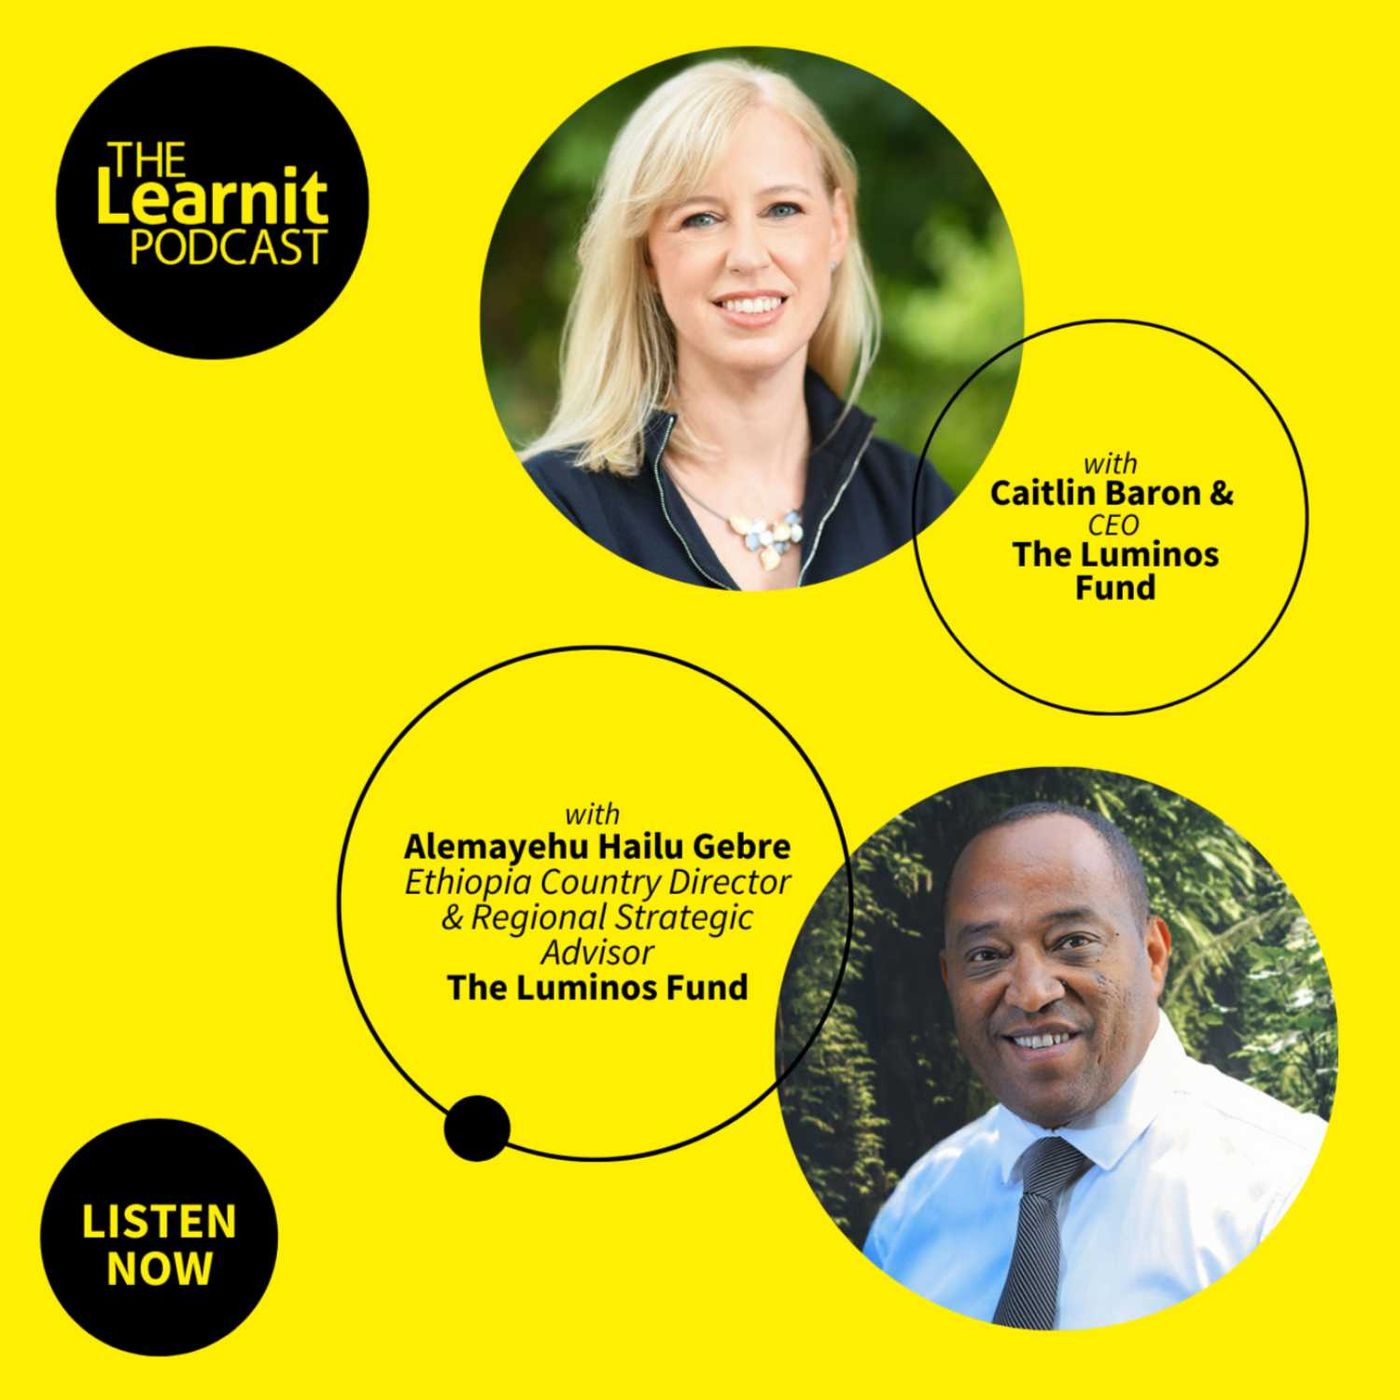 #38 Caitlin Baron & Alemayehu Hailu Gebre, Luminos Fund: Packing 3 Years of Learning into 10 Months